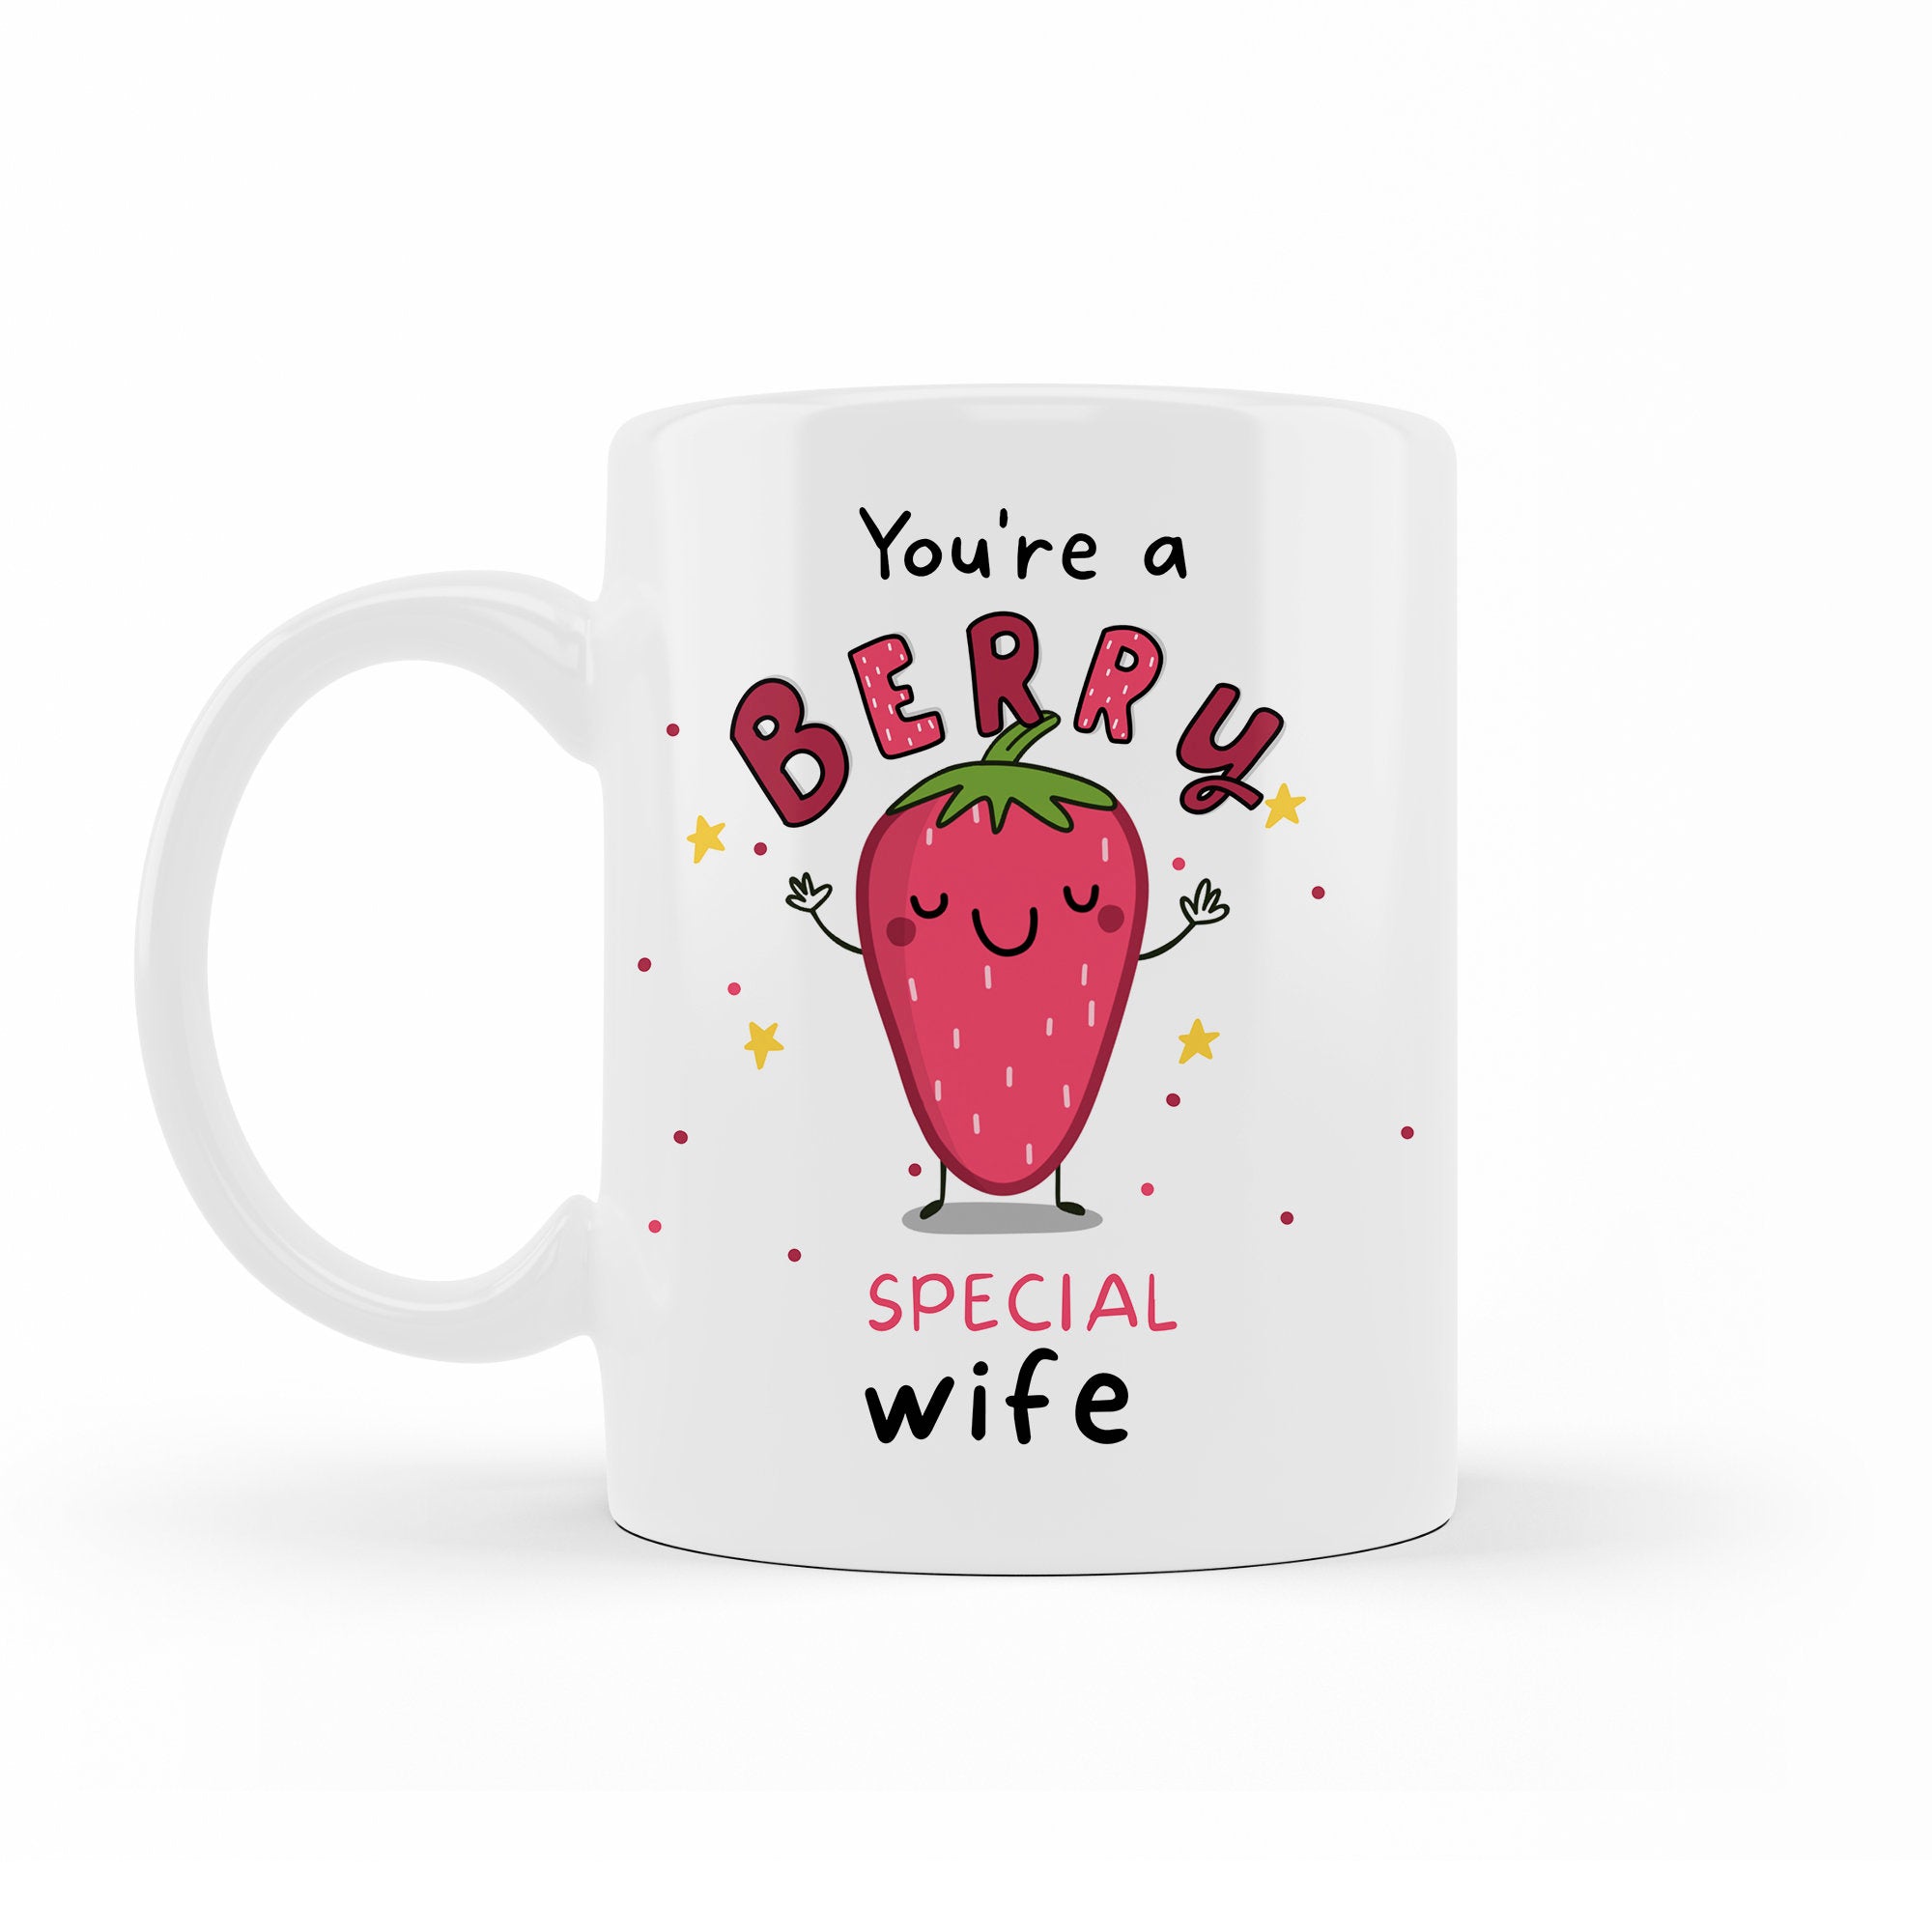 You're A Berry Special Wife, Wifey mug, Wife gift, for my Wife, Spouse